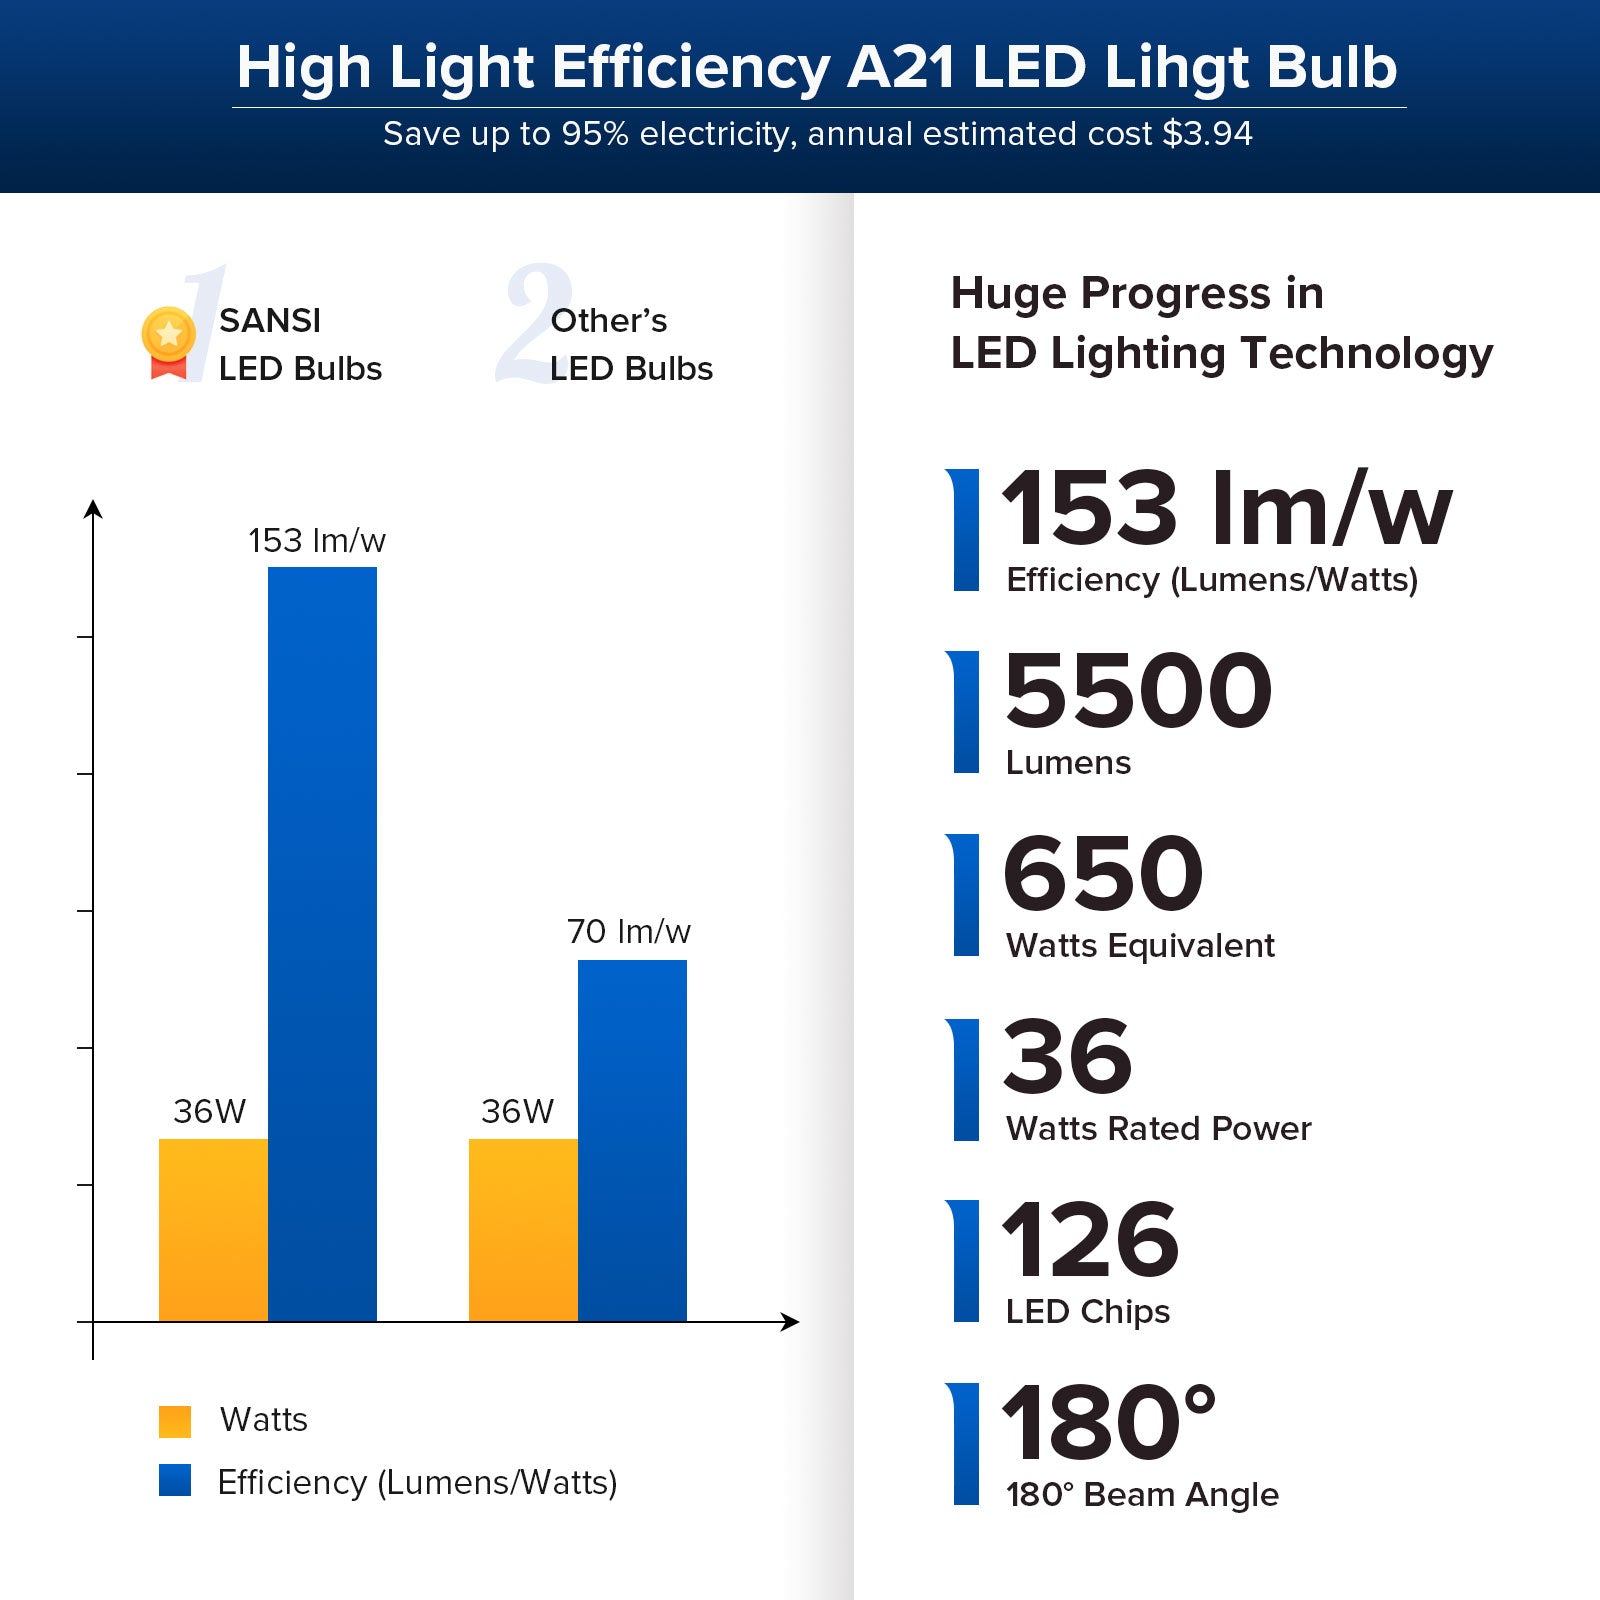 A21 36W LED Light Bulb has high light efficiency，save up to 90% electricity, annual estimated cost $3.94.